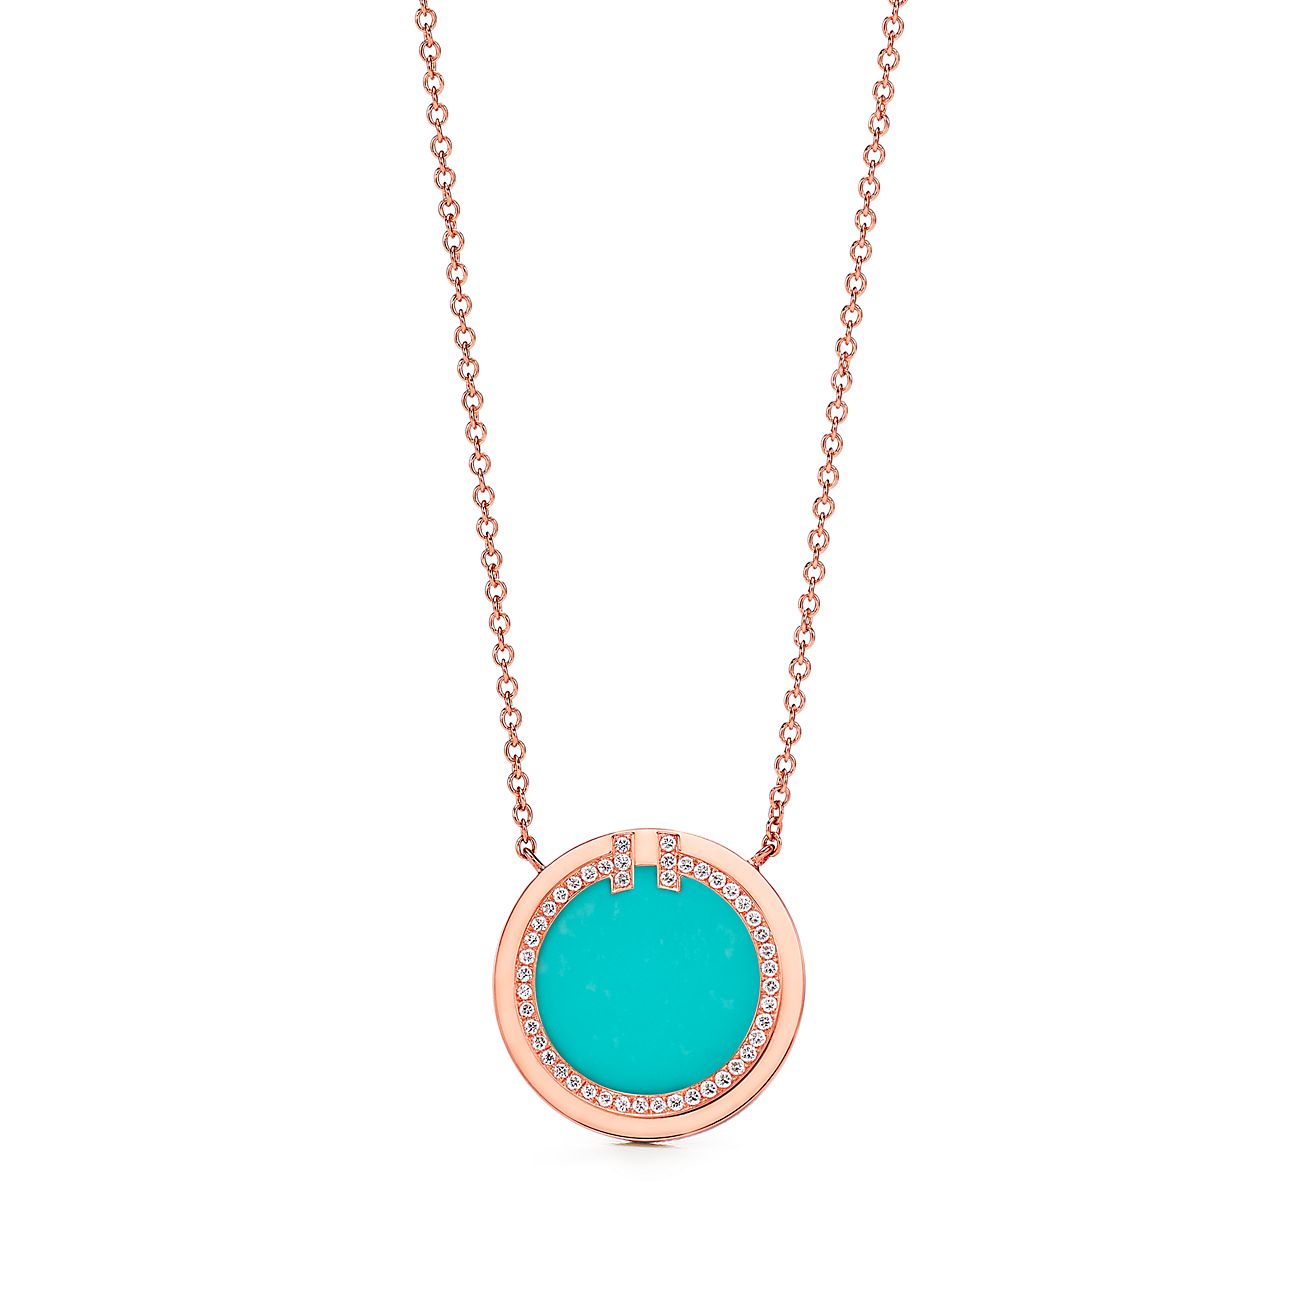 Turquoise Necklace with Diamond Star Charm - KAMARIA